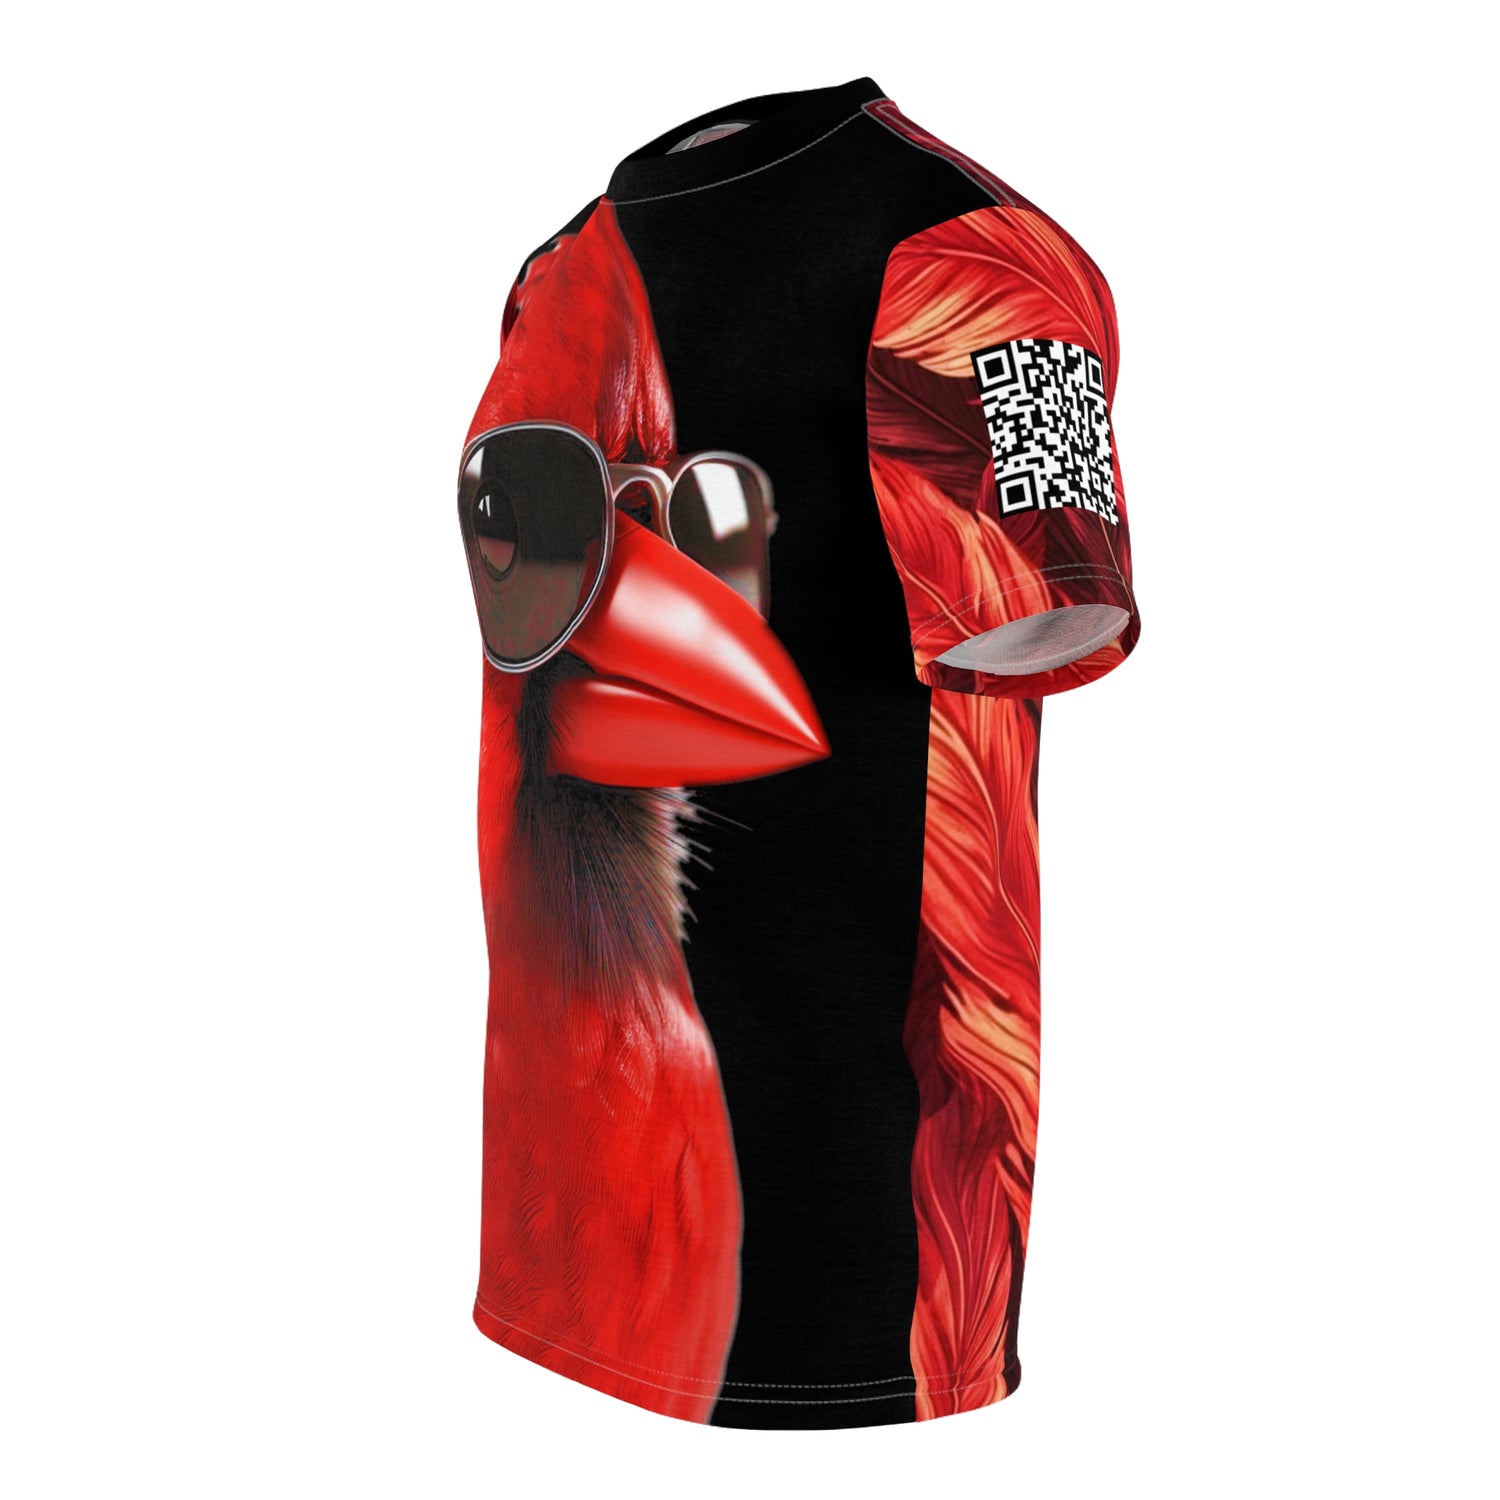 Unisex The cool Cardinal (master)